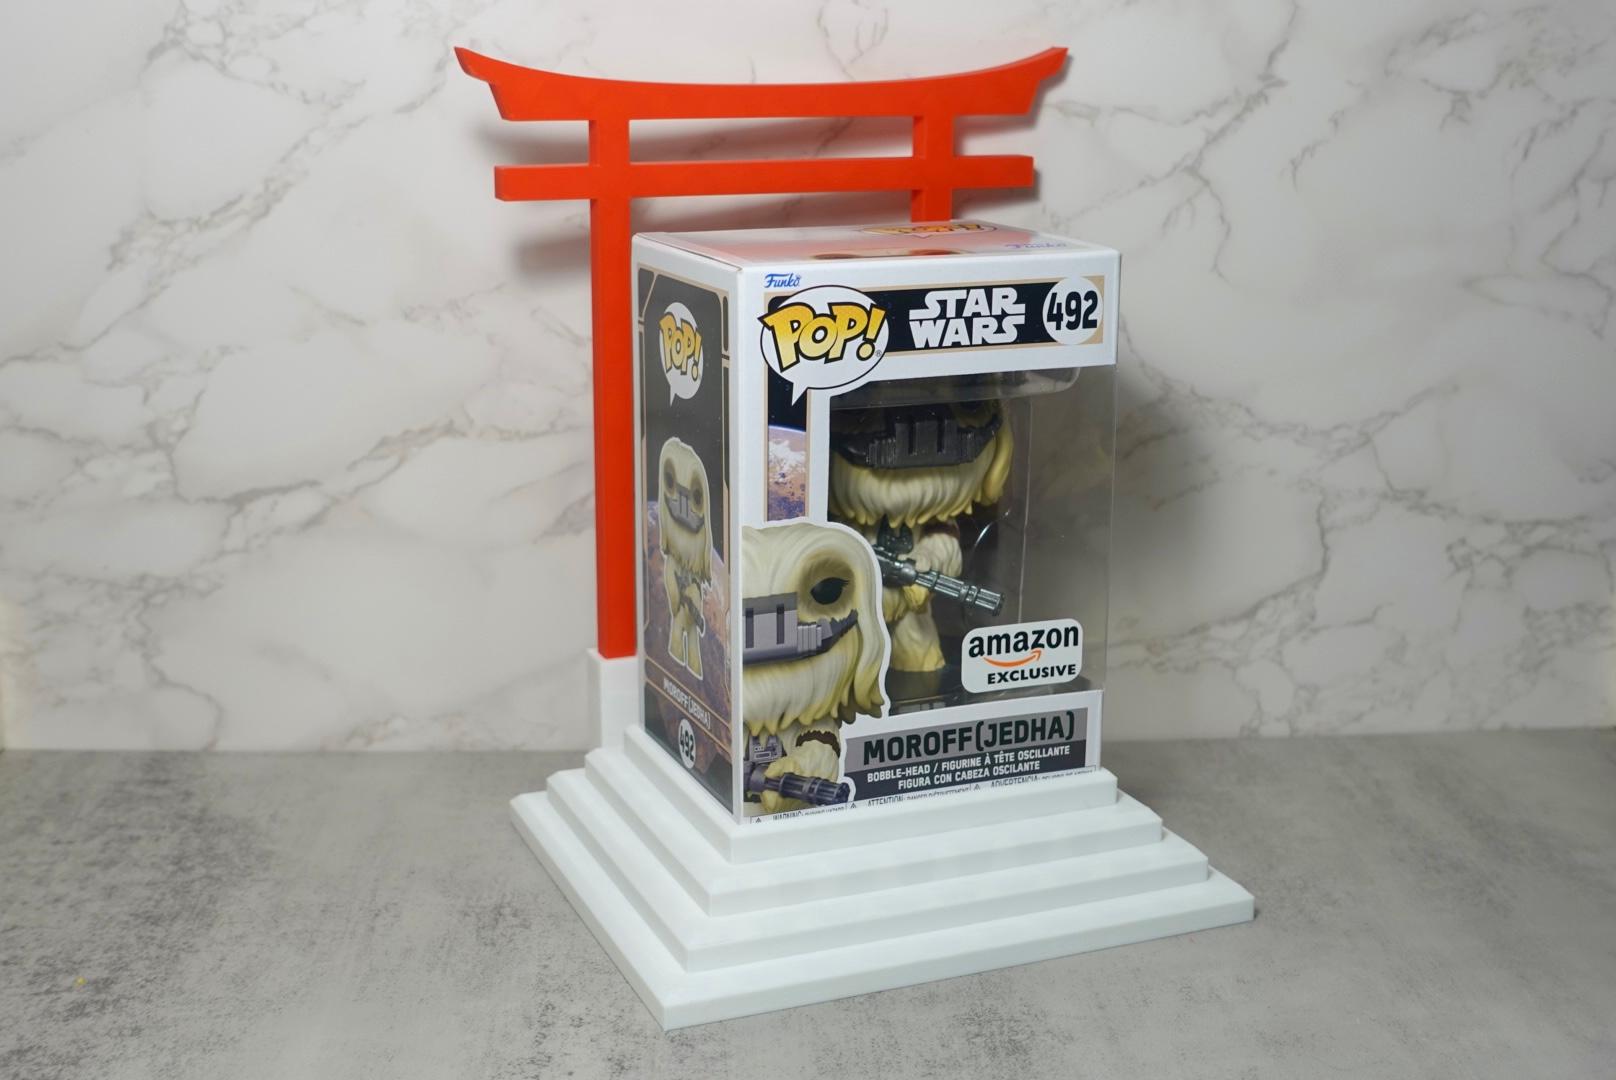 Shrine Display for Collectibles (3.5 x 4.5 x 6.25-inch Product Box) 3d model